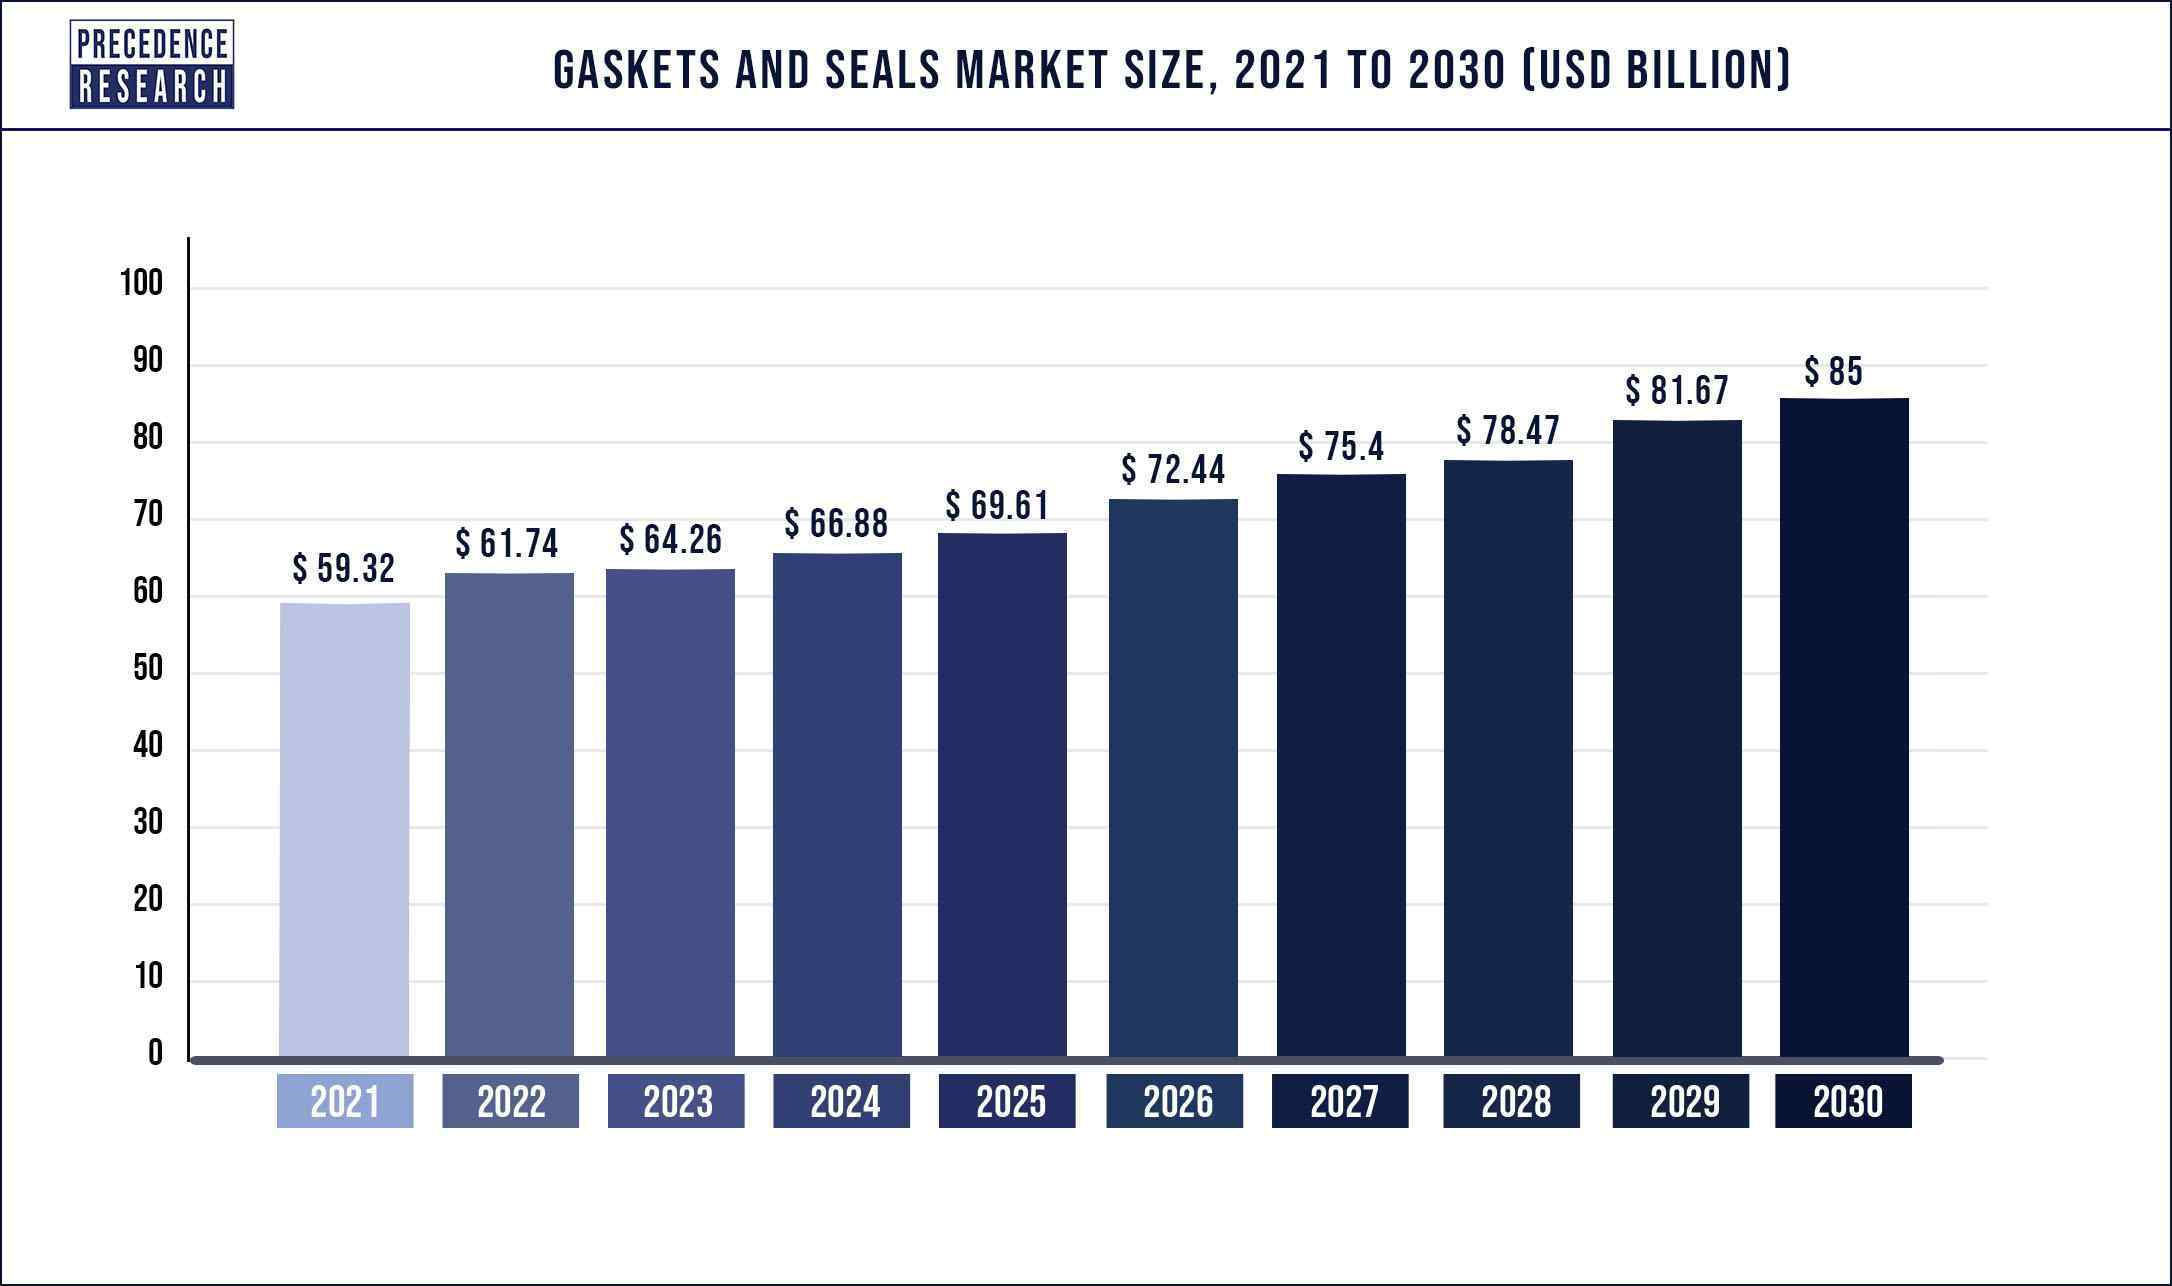 Gaskets and Seals Market Size 2021 to 2030